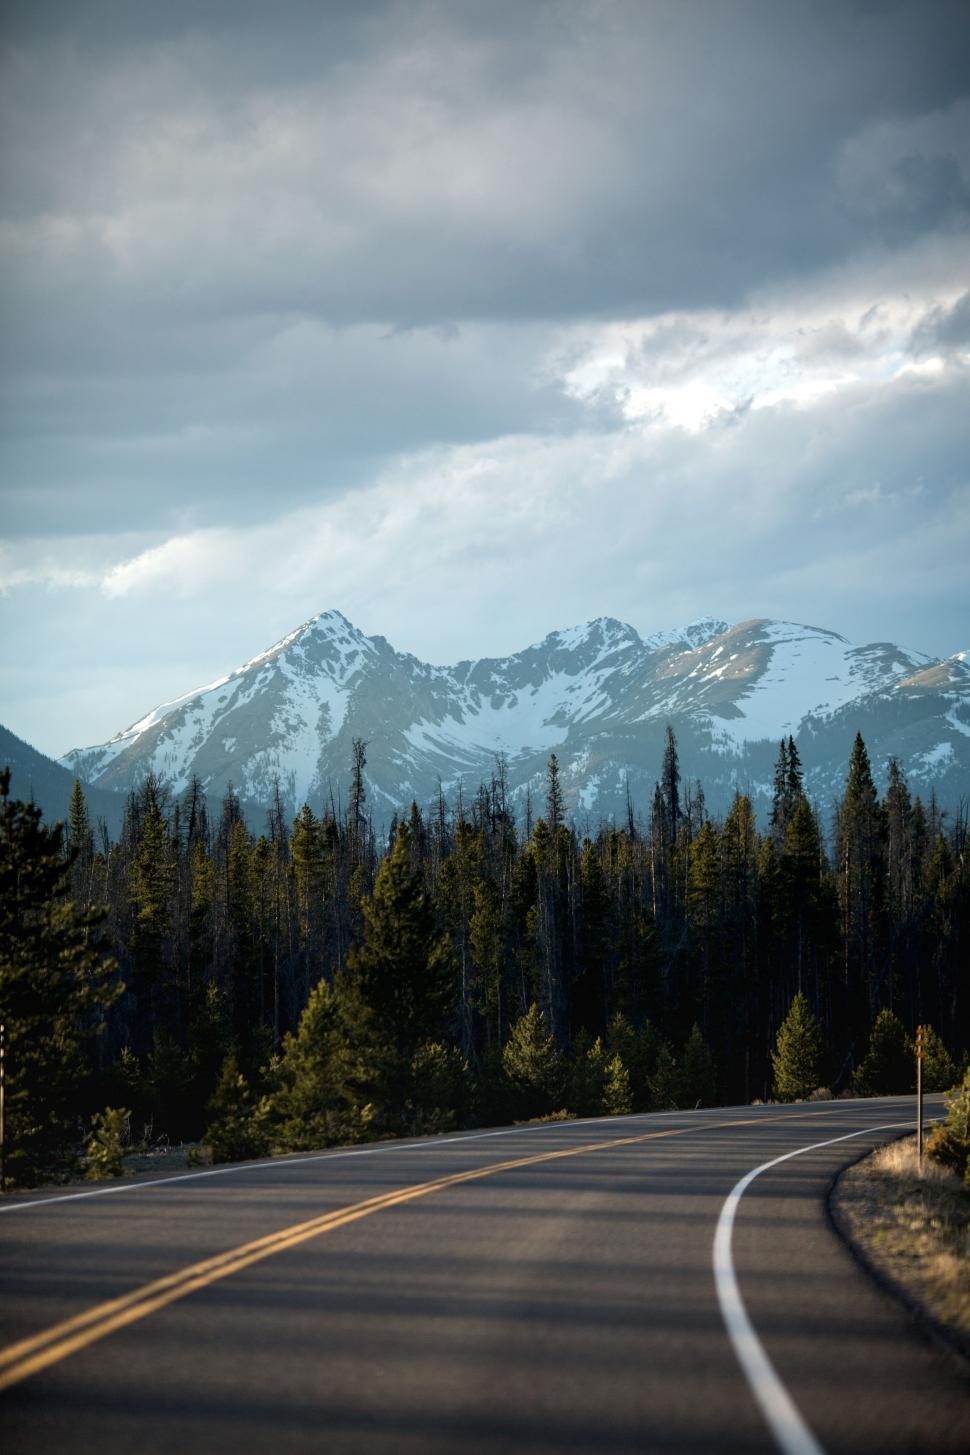 Free Image of Road Leading to Mountain Landscape 